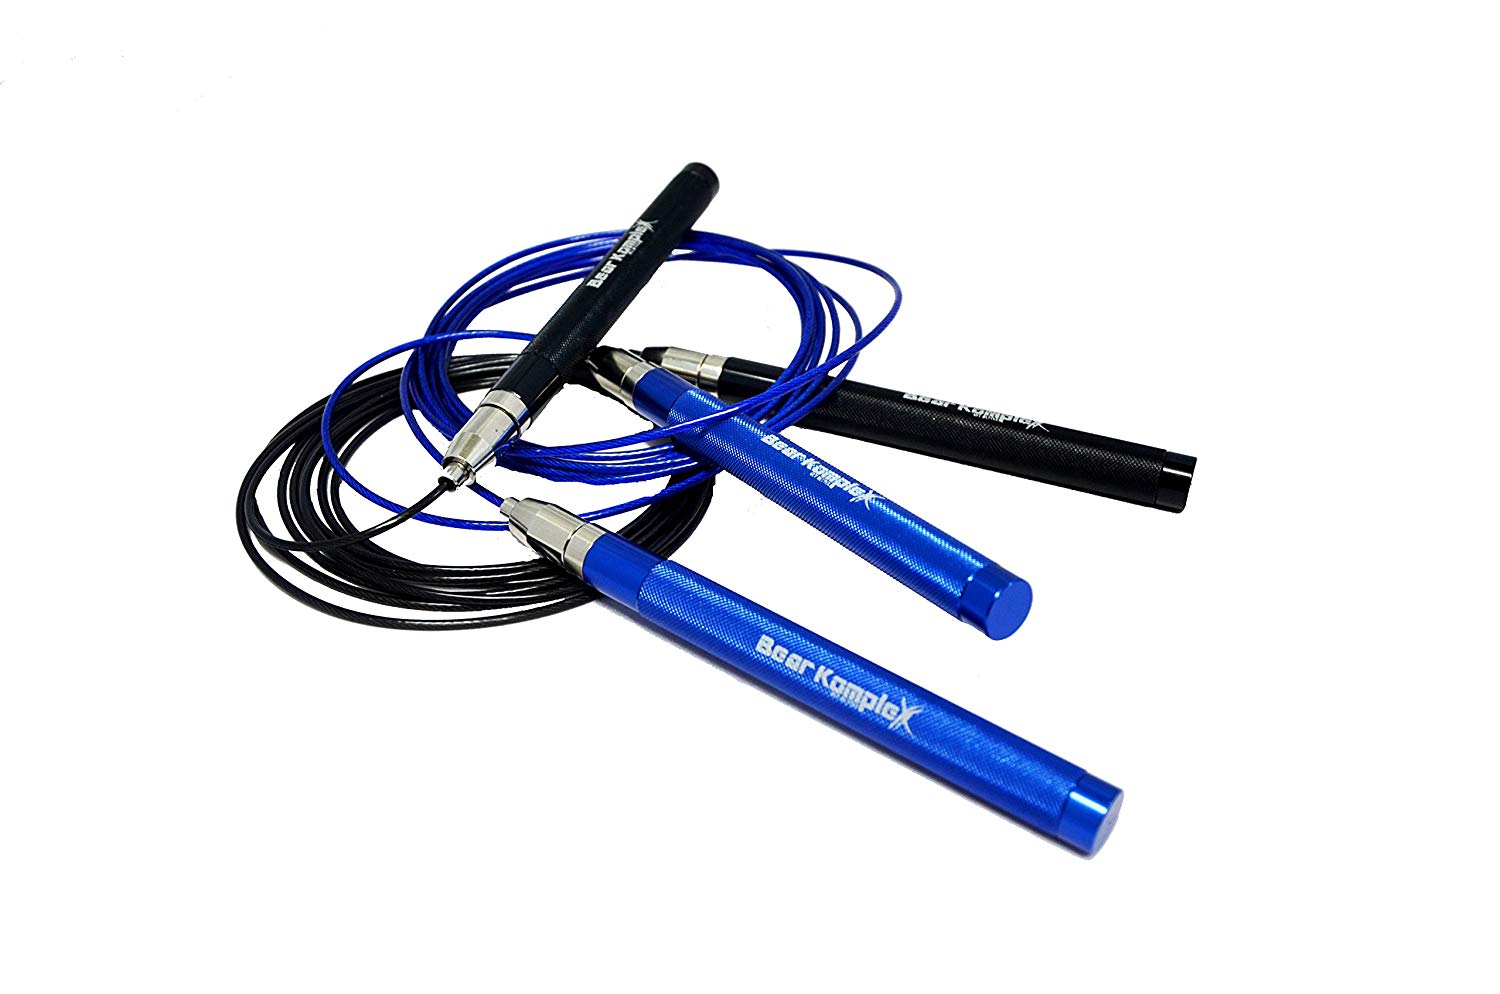 X PICSIL BEE Aluminium Jump Rope, Speed Rope, Skipping Jump Rope for Double  Unders, Cross Training, Boxing, Fitness. One of The Best Rope in The World.  Jump Faster with Less Effort!!! 